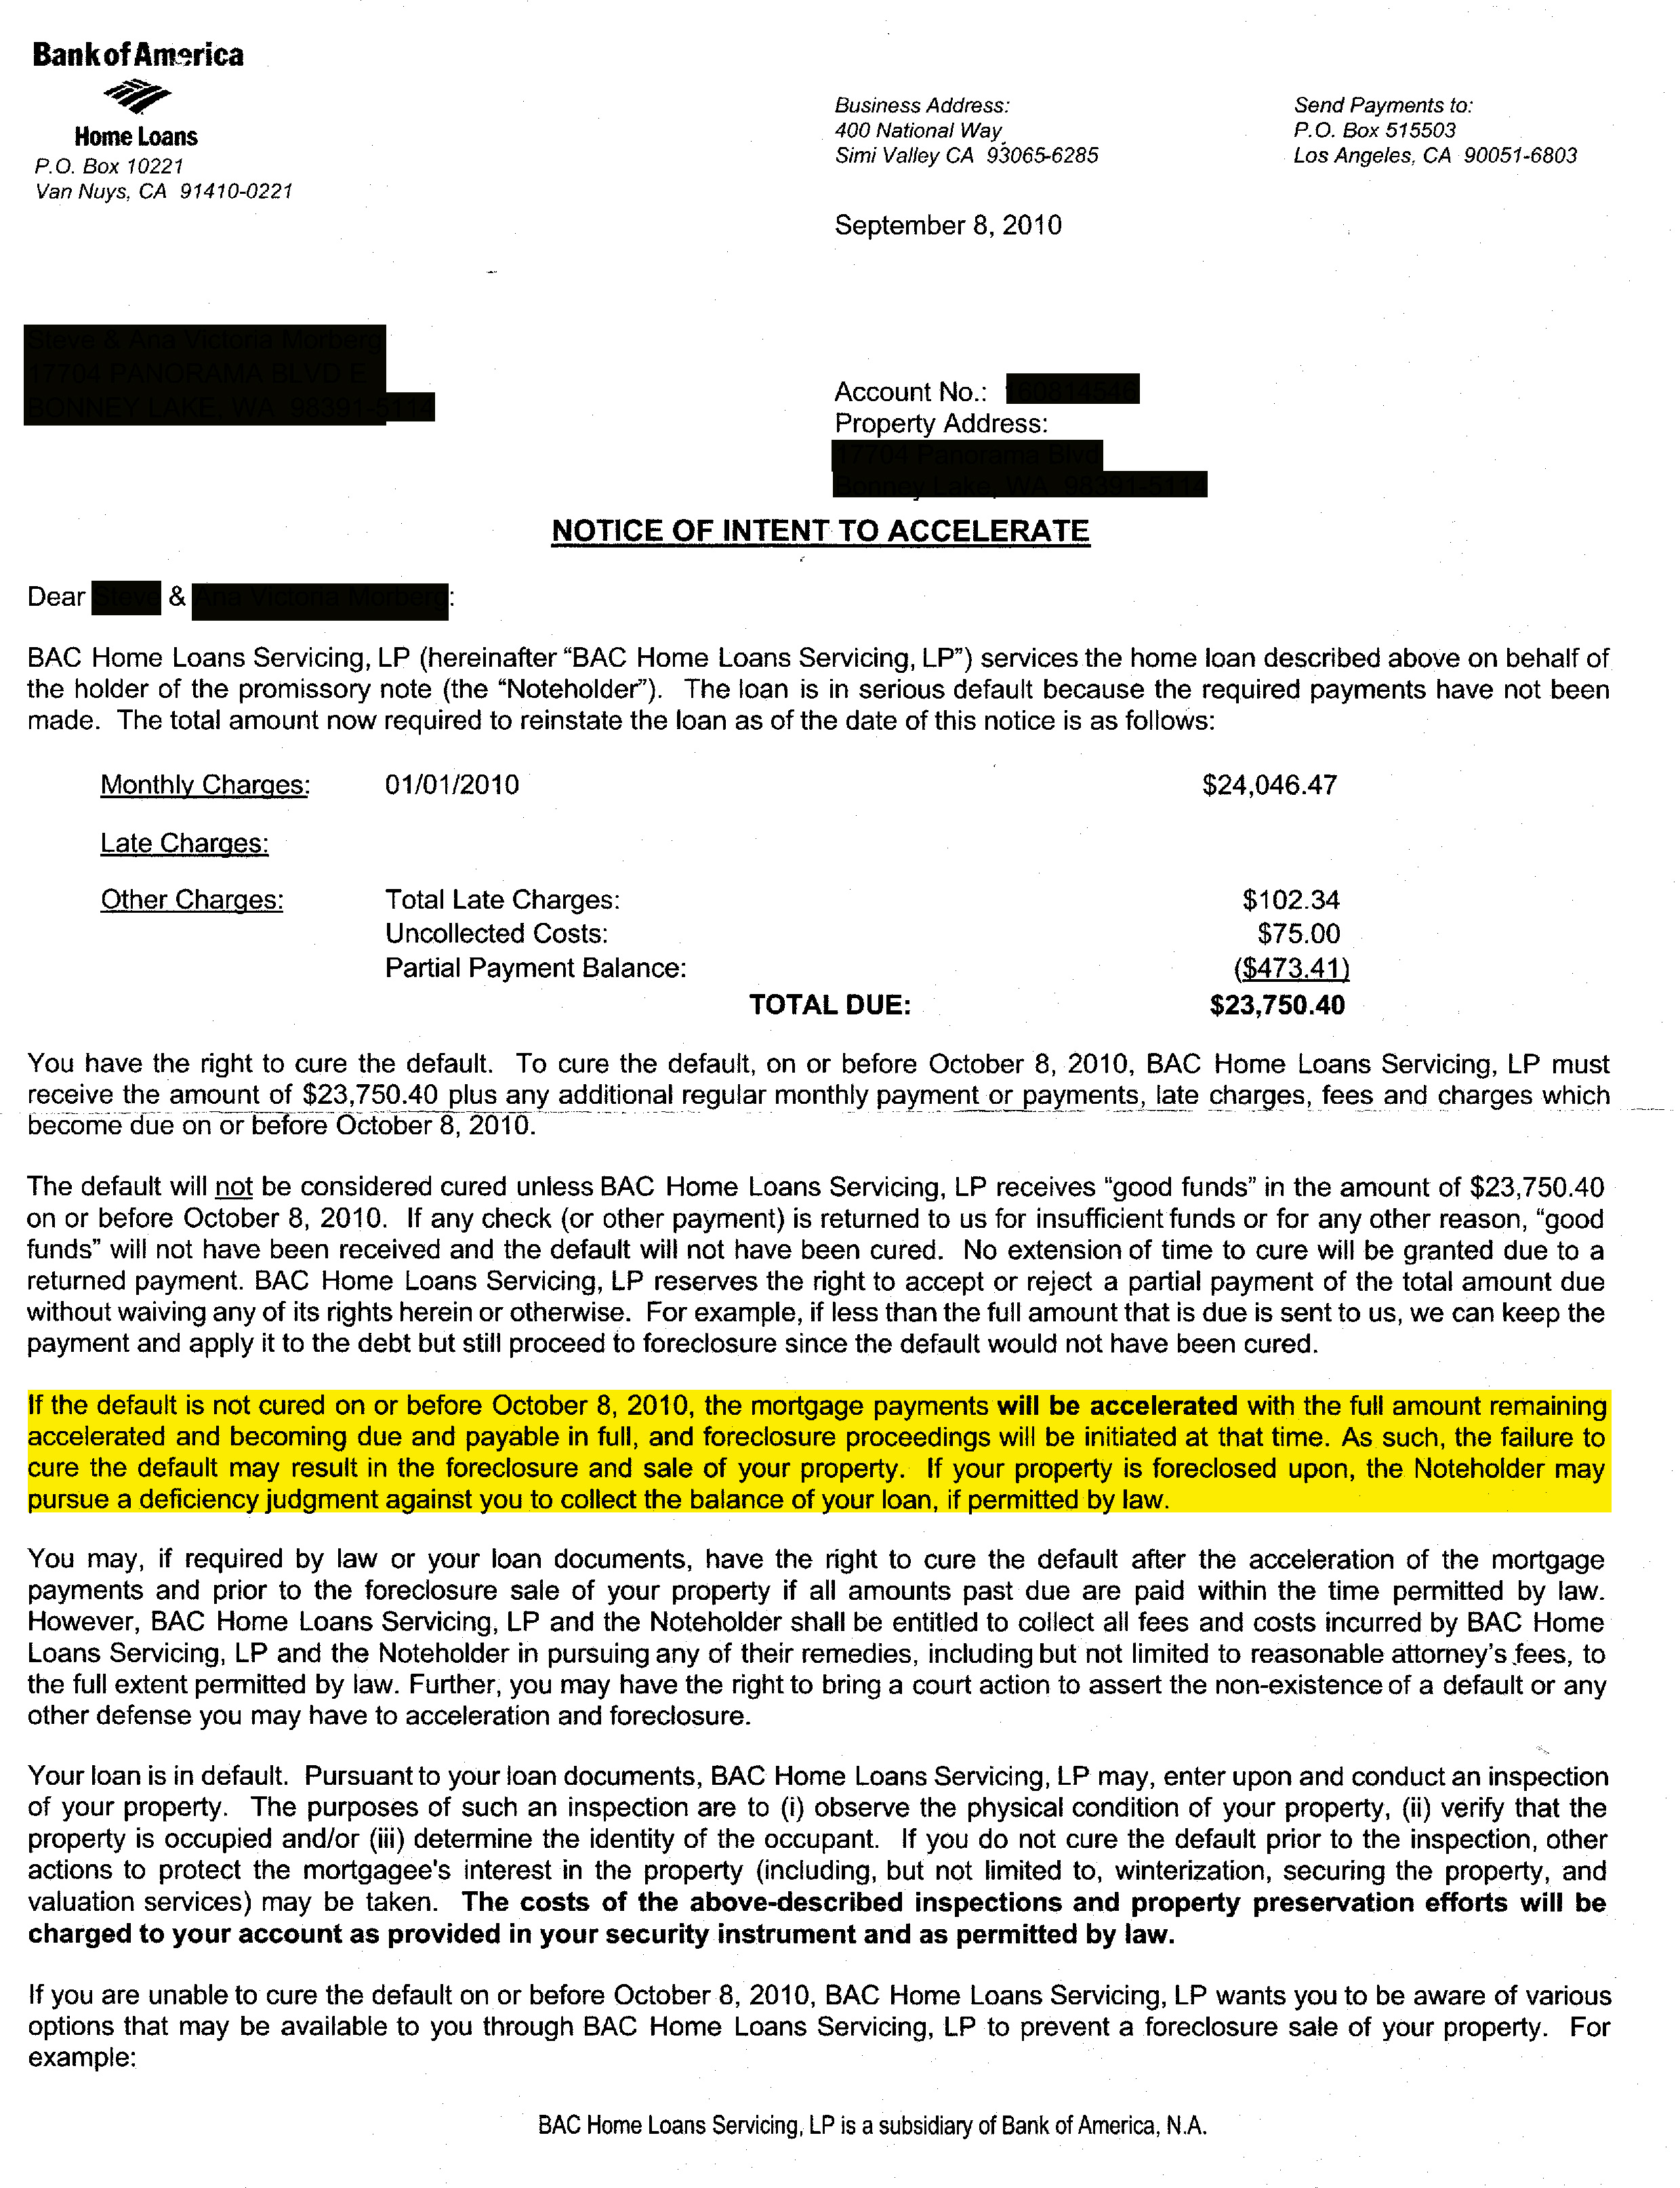 Notice Of Intent To Foreclose Letter Template 2020 Fi - vrogue.co